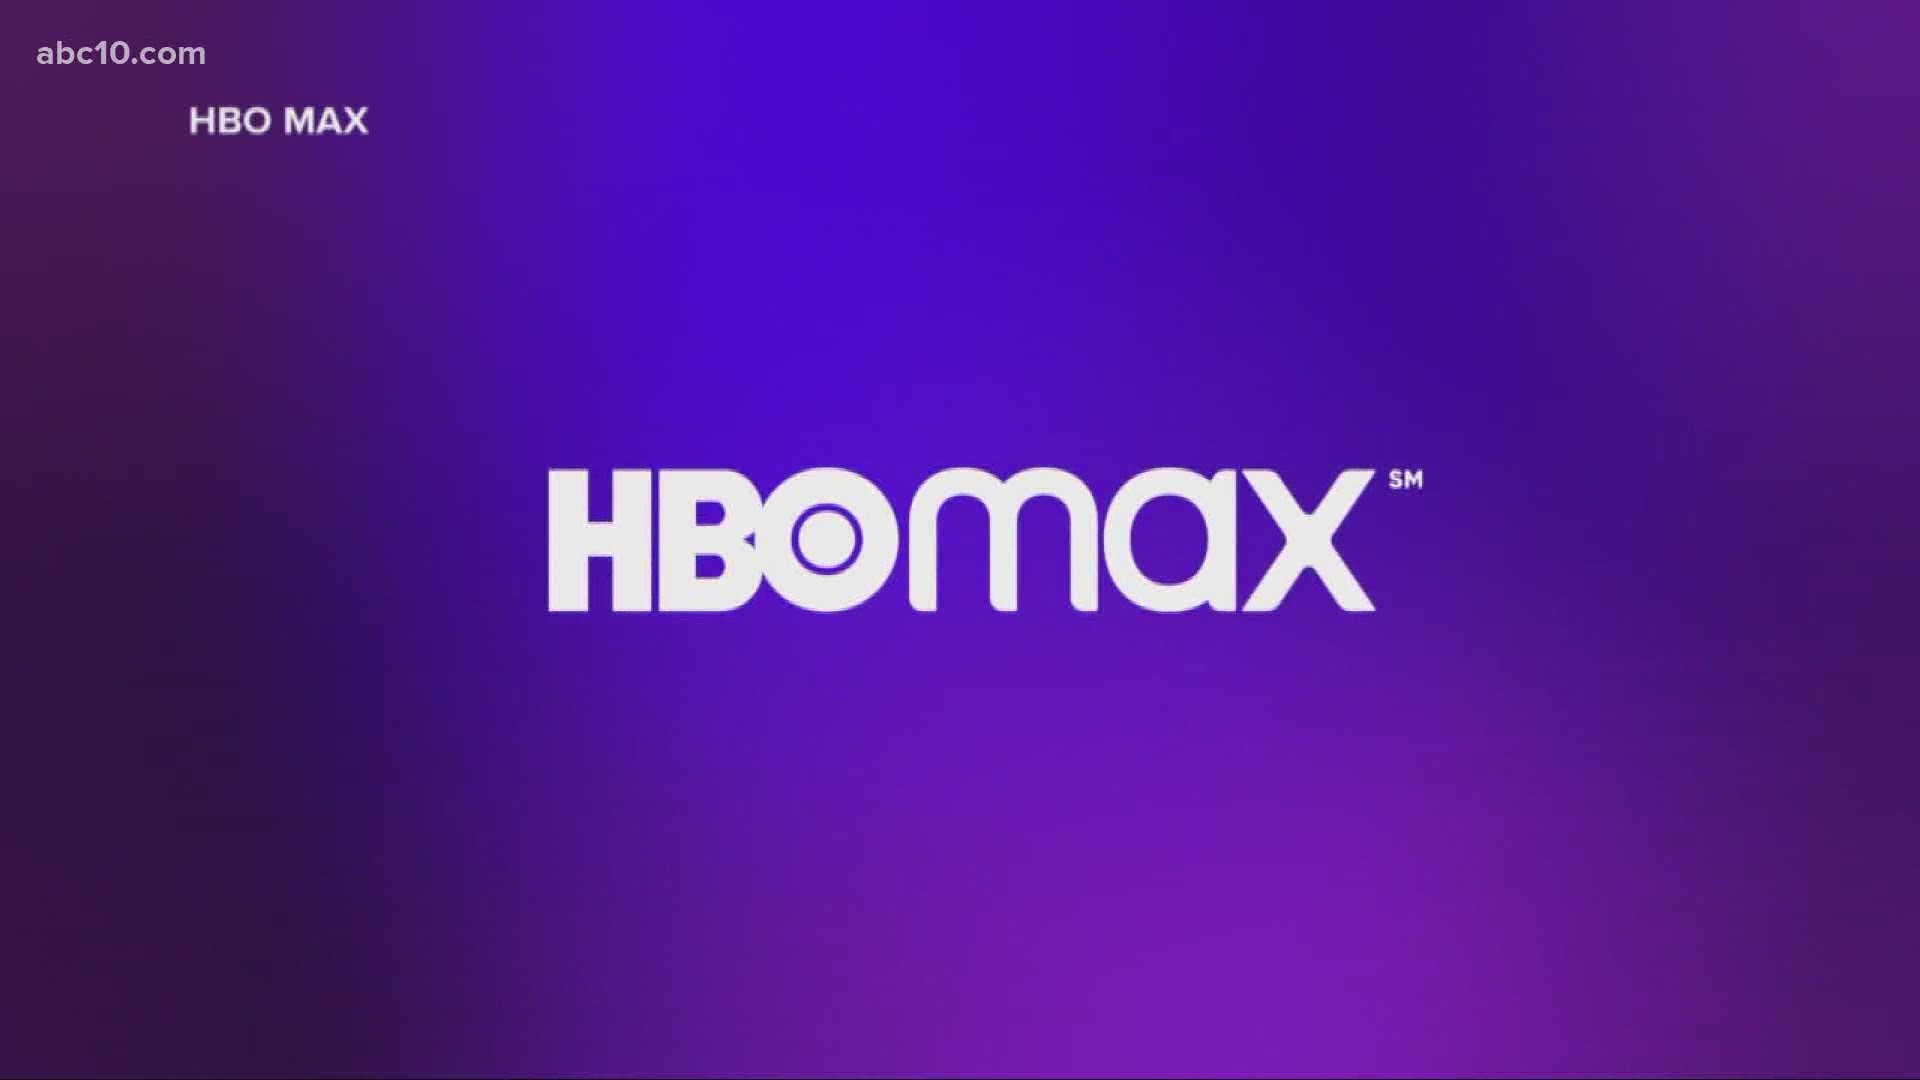 In today's entertainment news roundup, HBO Max streaming service launches, author JK Rowling has released a new children's book "The Ickabog", and more!